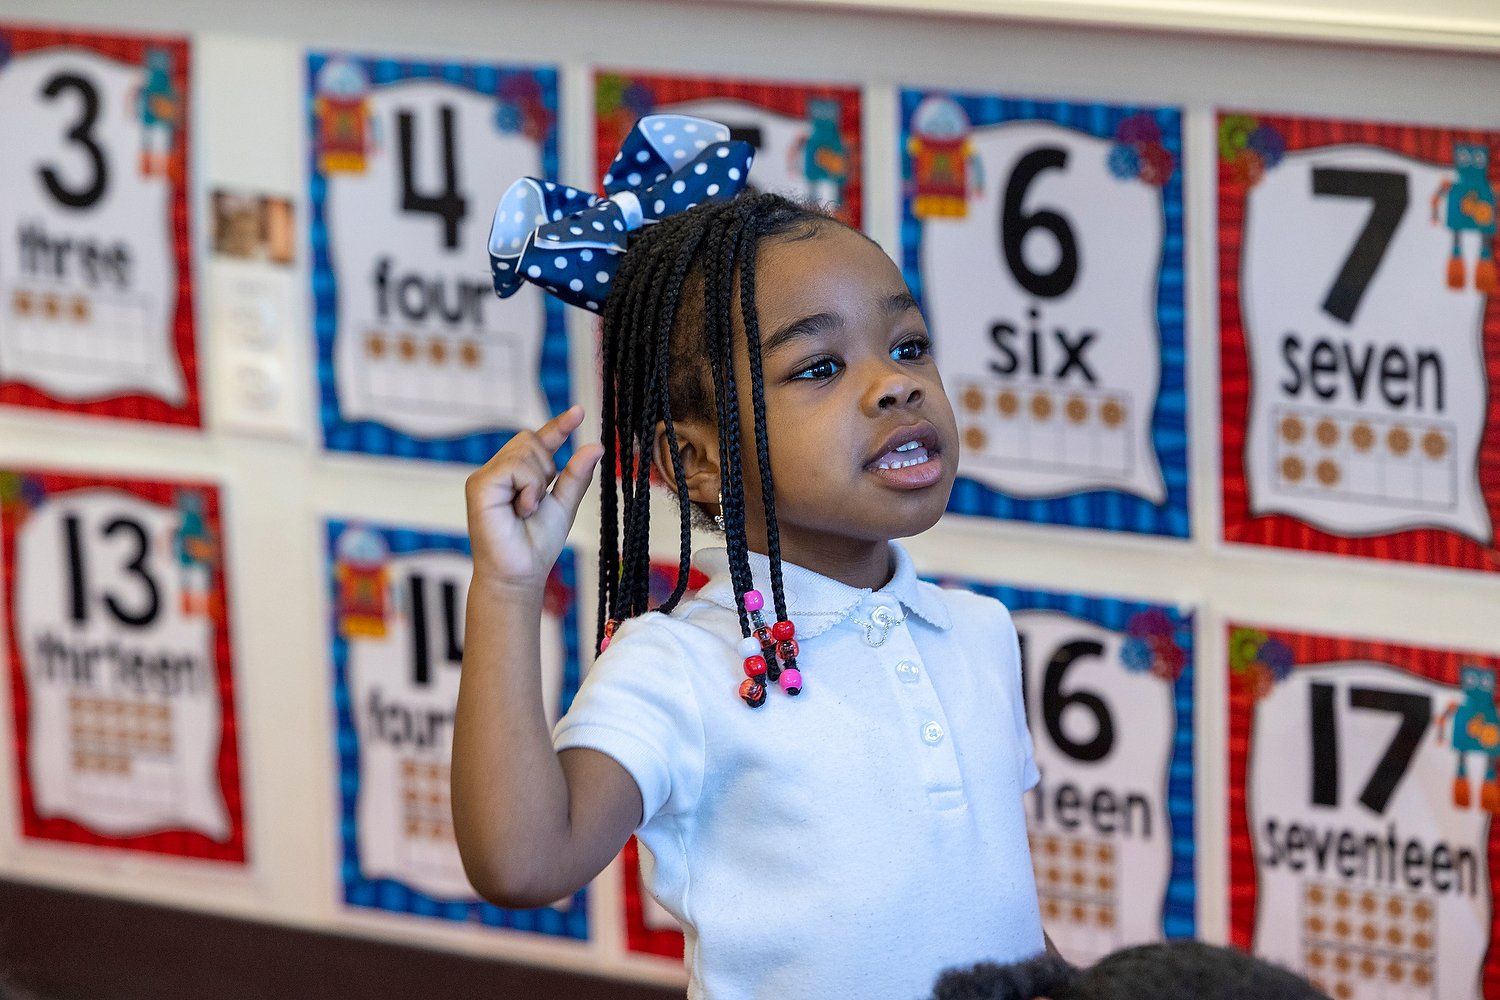 Diverse student in a classroom raising hand to answer a question